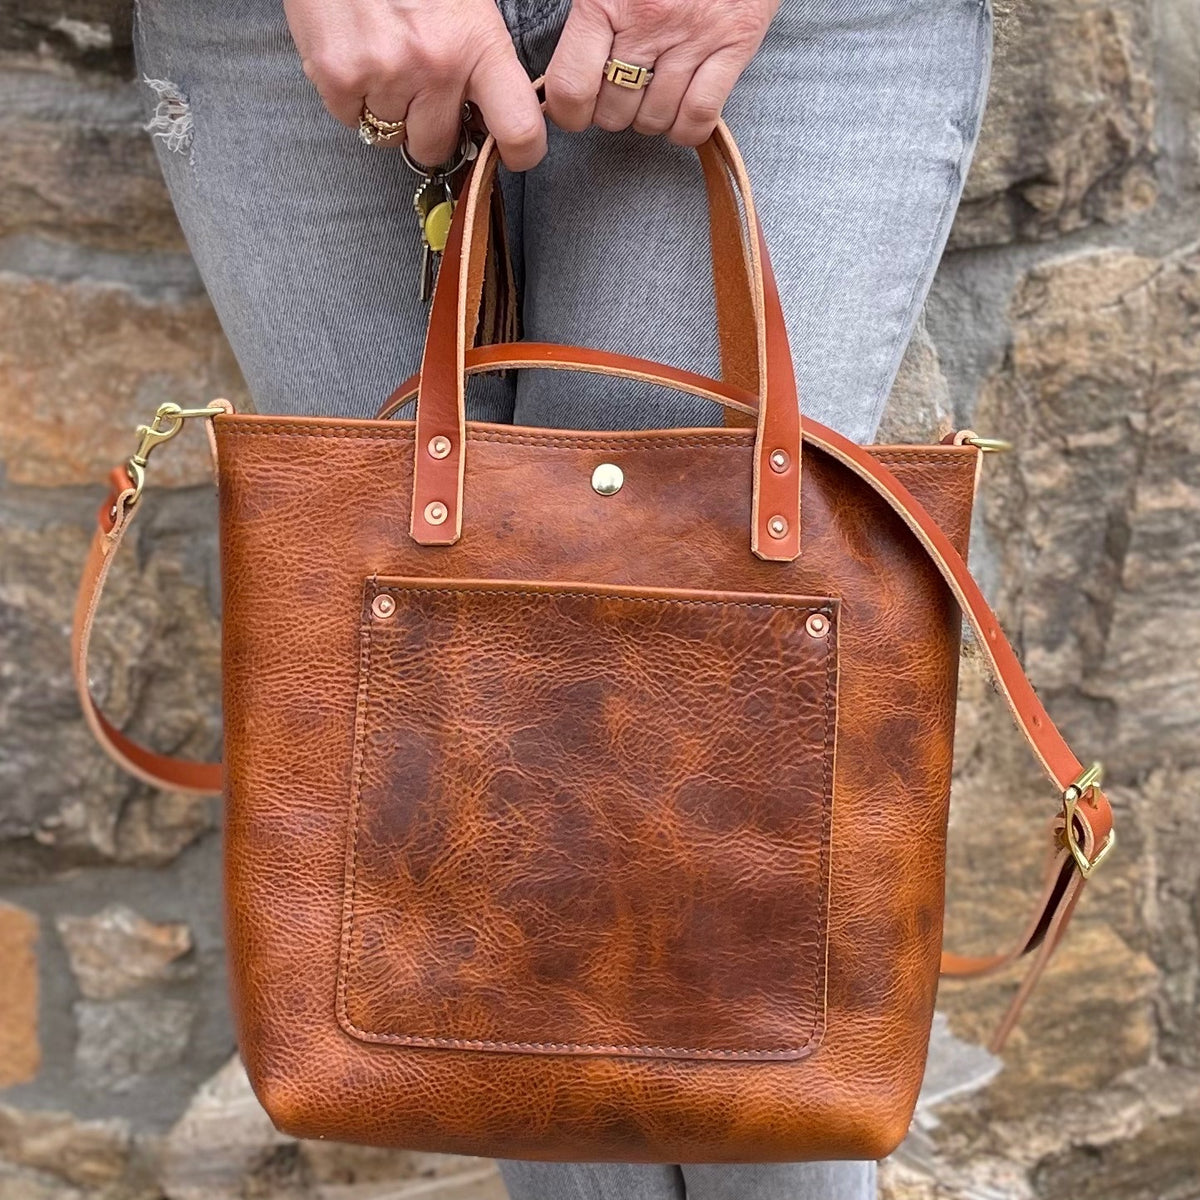  Handmade real leather bucket bag - Soft veg tanned leather :  Handmade Products